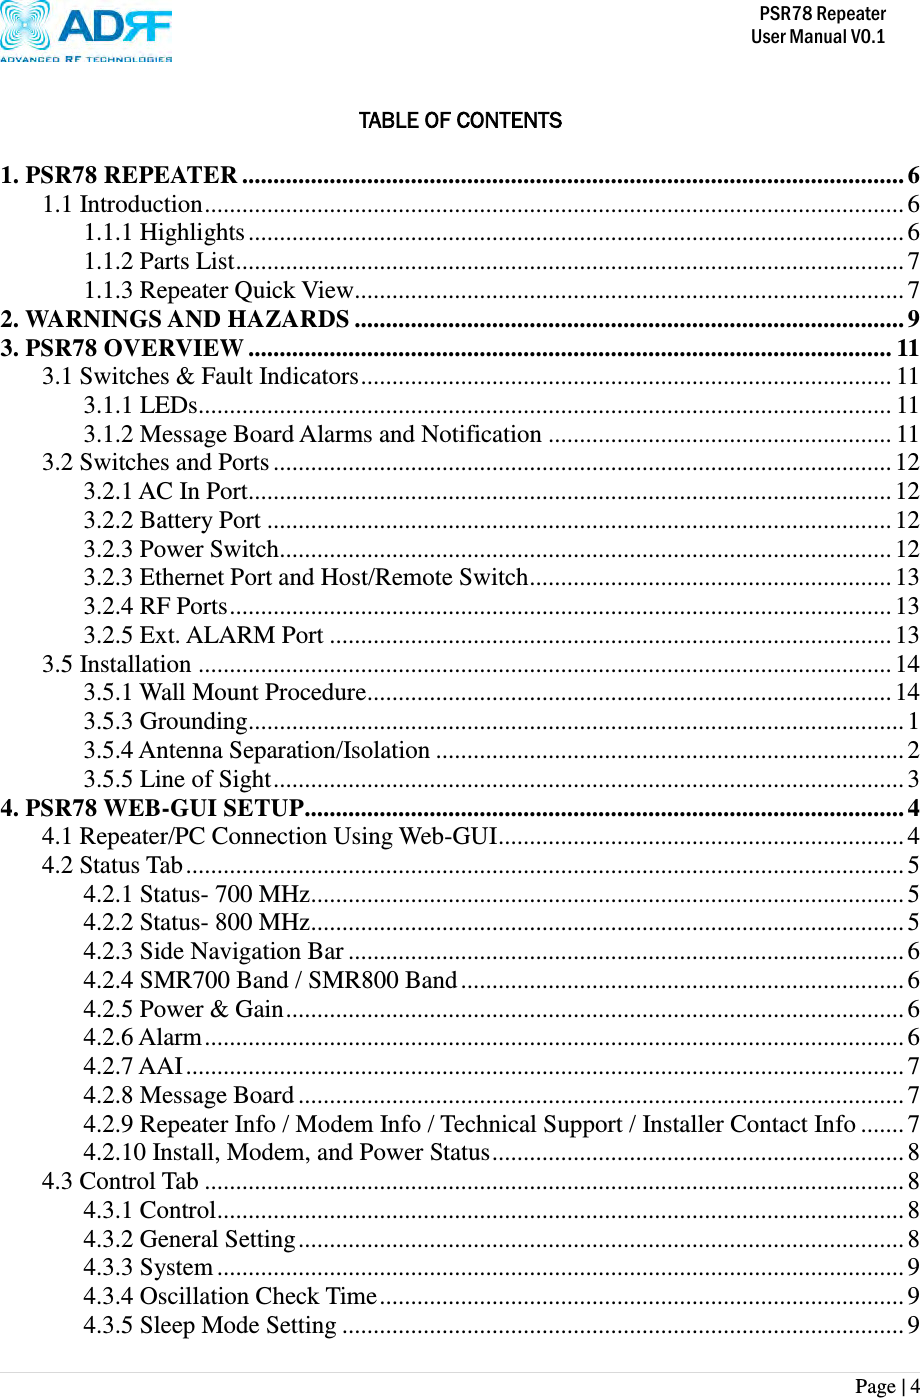           PSR78 Repeater     User Manual V0.1 Page | 4     TABLE OF CONTENTS  1. PSR78 REPEATER .......................................................................................................... 6 1.1 Introduction ................................................................................................................ 6 1.1.1 Highlights ......................................................................................................... 6 1.1.2 Parts List ........................................................................................................... 7 1.1.3 Repeater Quick View........................................................................................ 7 2. WARNINGS AND HAZARDS ........................................................................................ 9 3. PSR78 OVERVIEW ....................................................................................................... 11 3.1 Switches &amp; Fault Indicators ..................................................................................... 11 3.1.1 LEDs............................................................................................................... 11 3.1.2 Message Board Alarms and Notification ....................................................... 11 3.2 Switches and Ports ................................................................................................... 12 3.2.1 AC In Port....................................................................................................... 12 3.2.2 Battery Port .................................................................................................... 12 3.2.3 Power Switch.................................................................................................. 12 3.2.3 Ethernet Port and Host/Remote Switch .......................................................... 13 3.2.4 RF Ports .......................................................................................................... 13 3.2.5 Ext. ALARM Port .......................................................................................... 13 3.5 Installation ............................................................................................................... 14 3.5.1 Wall Mount Procedure .................................................................................... 14 3.5.3 Grounding......................................................................................................... 1 3.5.4 Antenna Separation/Isolation ........................................................................... 2 3.5.5 Line of Sight ..................................................................................................... 3 4. PSR78 WEB-GUI SETUP ................................................................................................ 4 4.1 Repeater/PC Connection Using Web-GUI ................................................................. 4 4.2 Status Tab ................................................................................................................... 5 4.2.1 Status- 700 MHz ............................................................................................... 5 4.2.2 Status- 800 MHz ............................................................................................... 5 4.2.3 Side Navigation Bar ......................................................................................... 6 4.2.4 SMR700 Band / SMR800 Band ....................................................................... 6 4.2.5 Power &amp; Gain ................................................................................................... 6 4.2.6 Alarm ................................................................................................................ 6 4.2.7 AAI ................................................................................................................... 7 4.2.8 Message Board ................................................................................................. 7 4.2.9 Repeater Info / Modem Info / Technical Support / Installer Contact Info ....... 7 4.2.10 Install, Modem, and Power Status .................................................................. 8 4.3 Control Tab ................................................................................................................ 8 4.3.1 Control .............................................................................................................. 8 4.3.2 General Setting ................................................................................................. 8 4.3.3 System .............................................................................................................. 9 4.3.4 Oscillation Check Time .................................................................................... 9 4.3.5 Sleep Mode Setting .......................................................................................... 9 